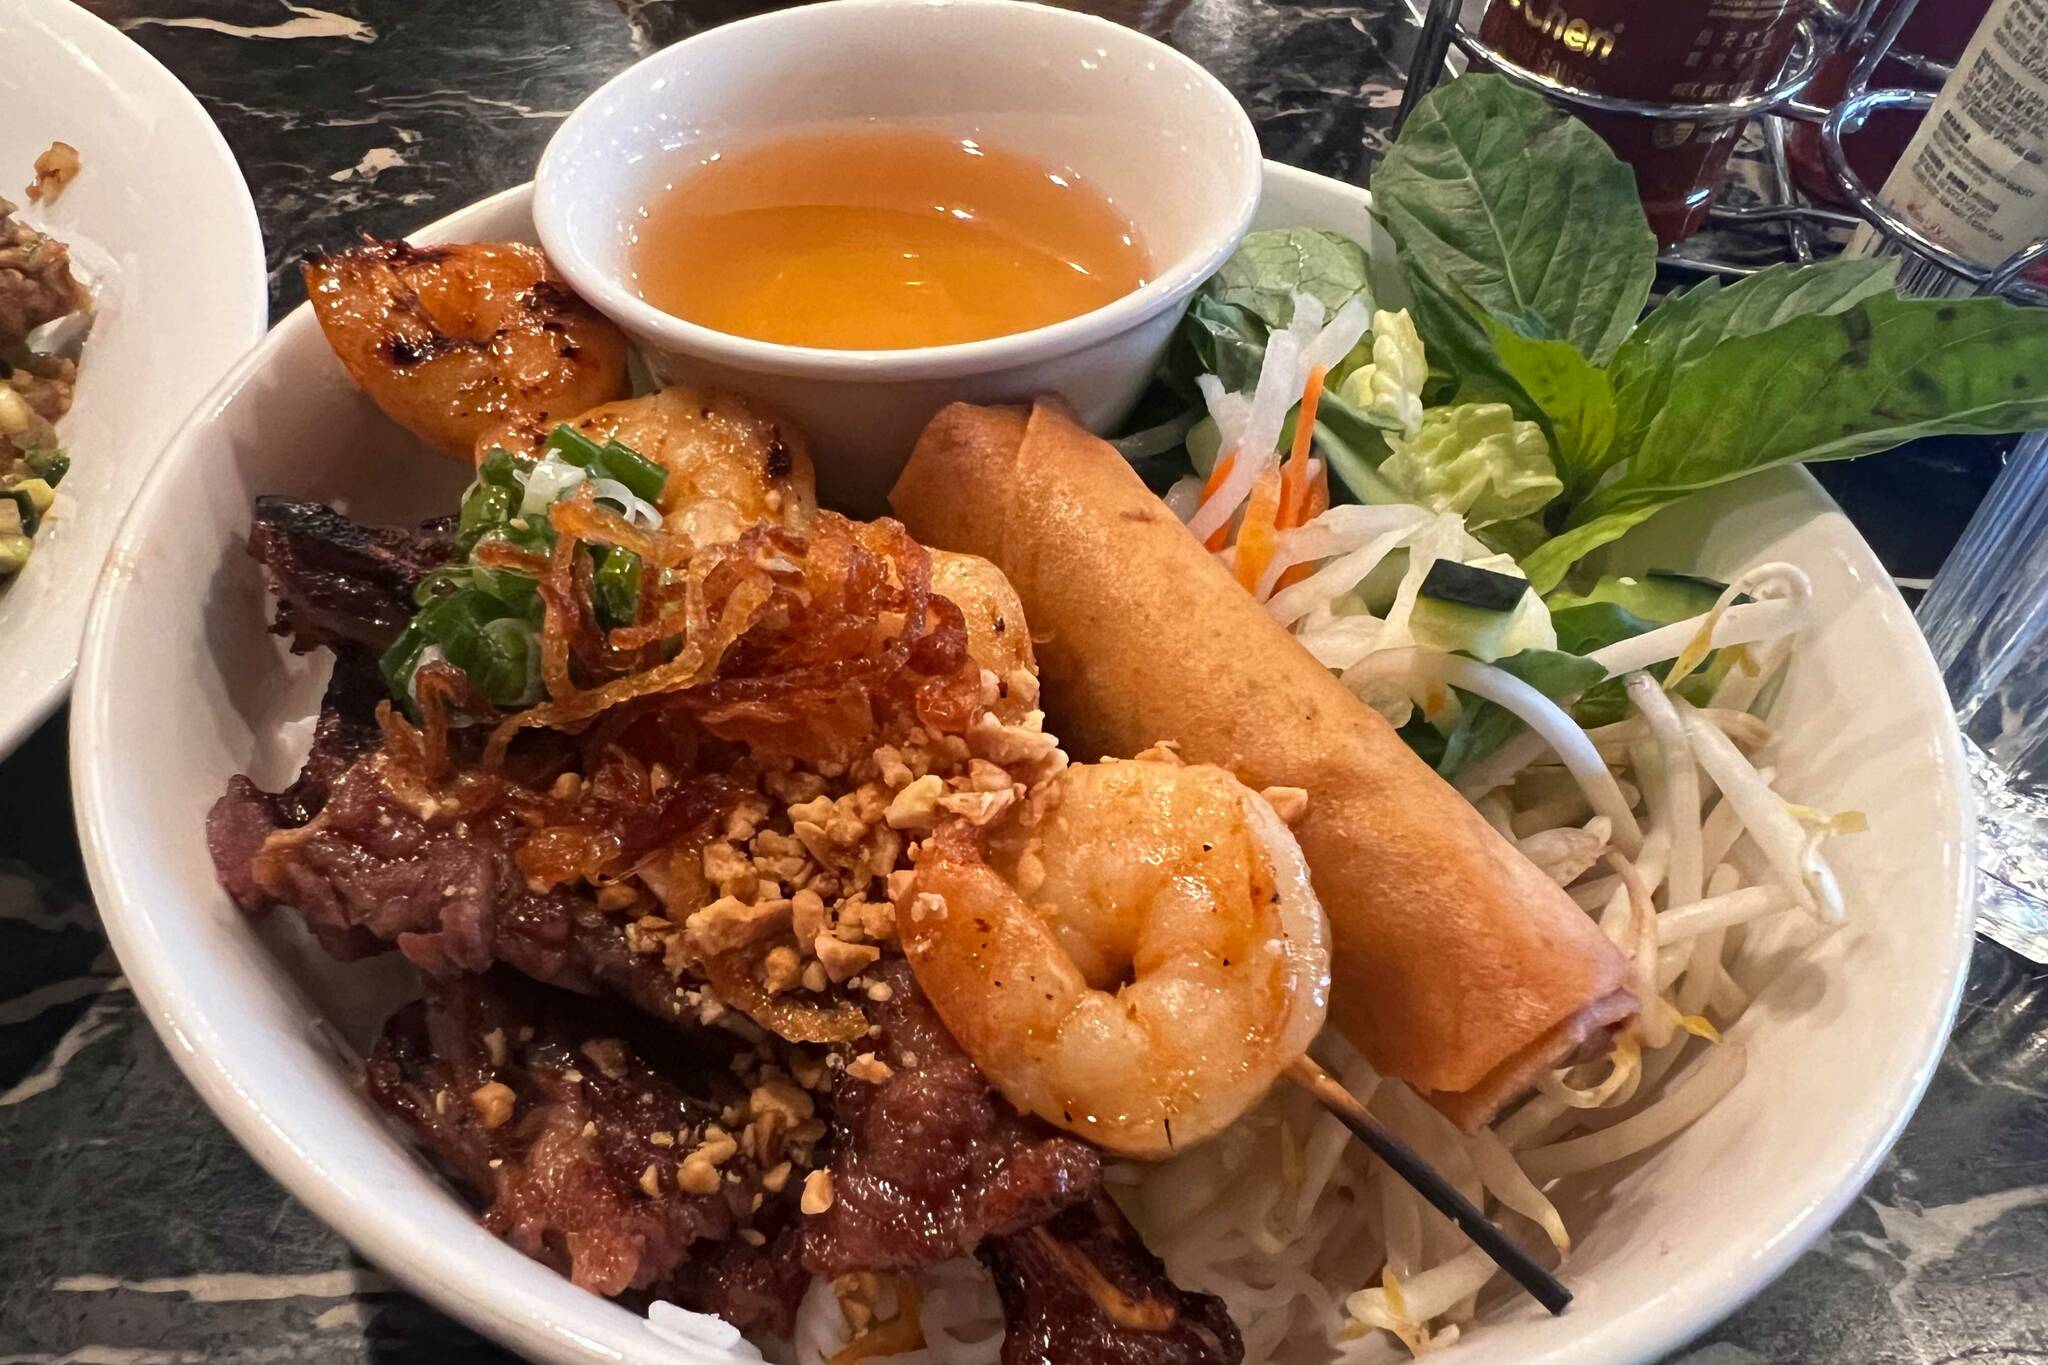 Short rib, shrimp skewer and egg roll vermicelli noodle bowl from Viet’s Phoody. Cameron Sheppard/Sound Publishing